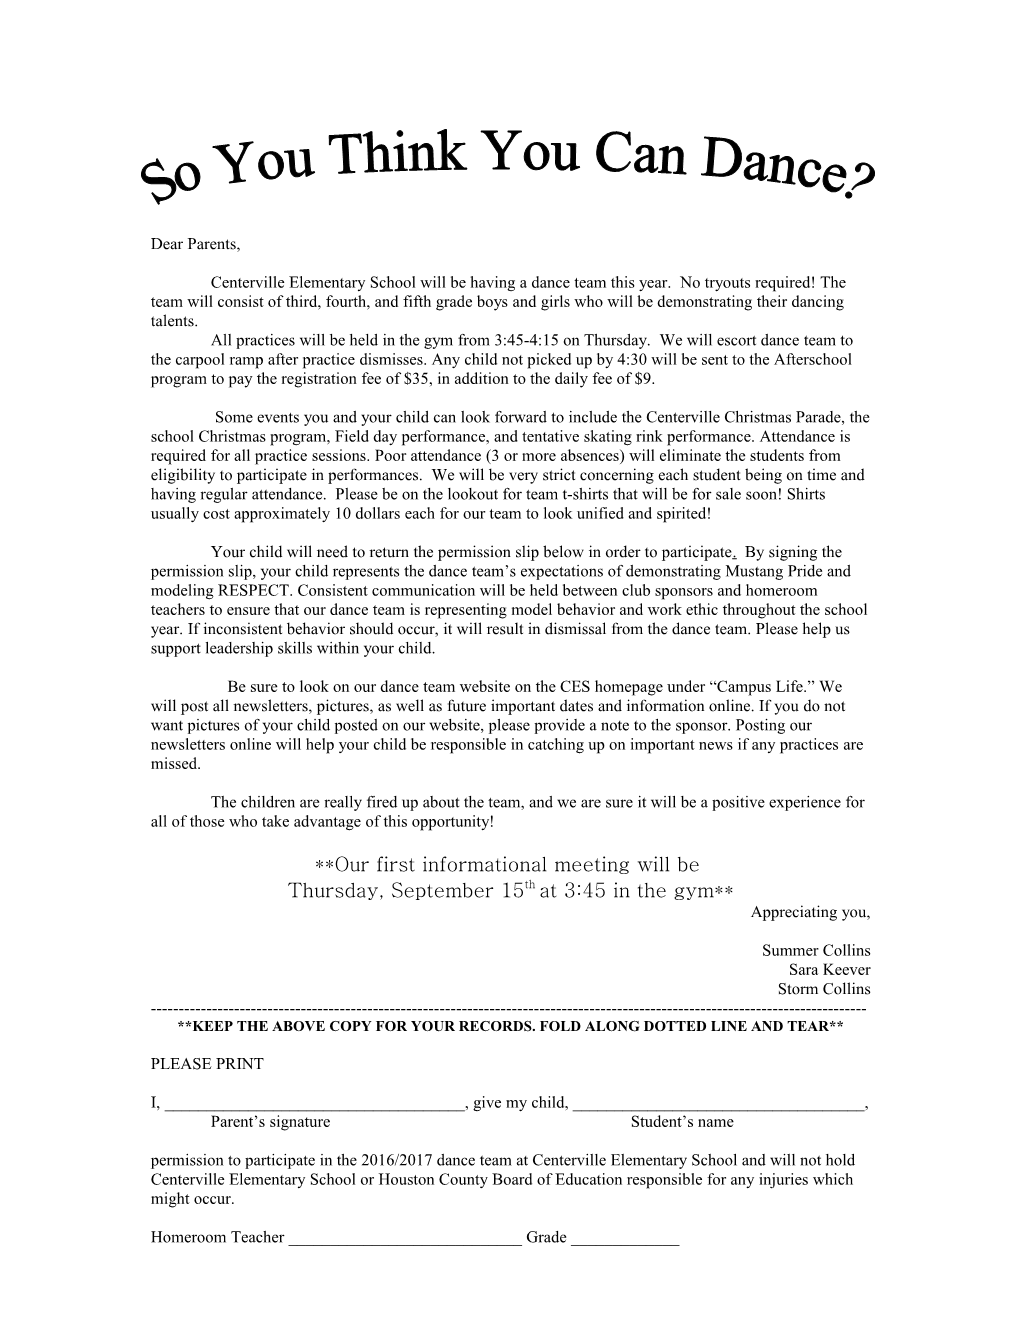 Centerville Elementary School Will Be Having a Dance Team This Year. No Tryouts Required!